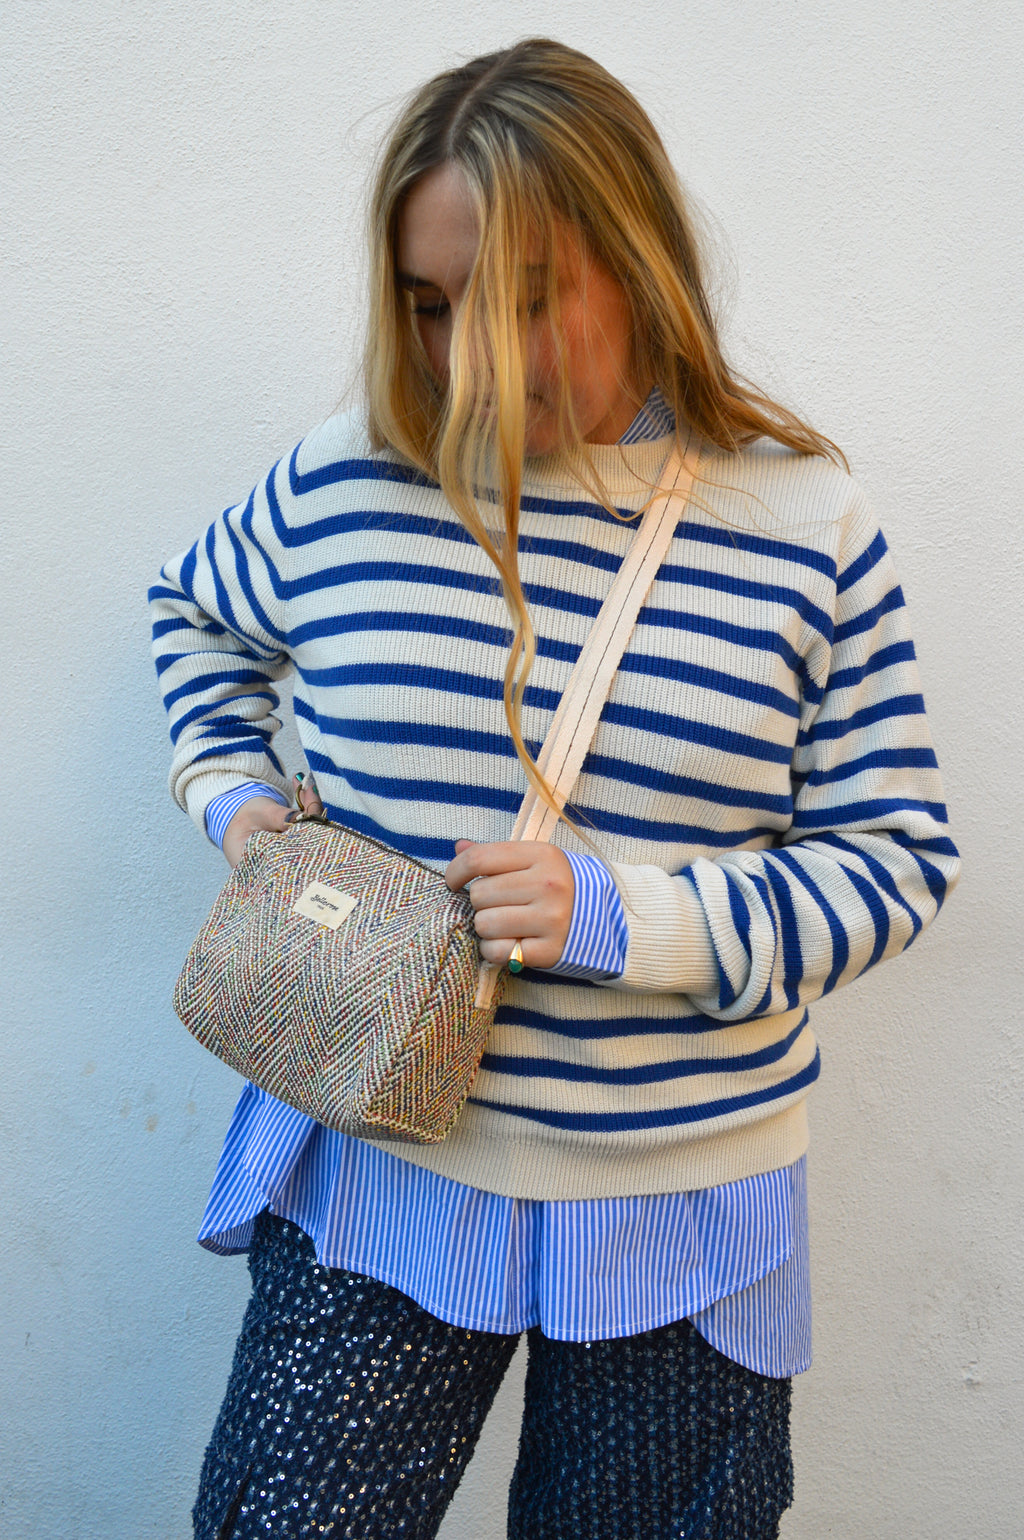 Lolly's Laundry Swan Neon Blue Jumper - The Mercantile London